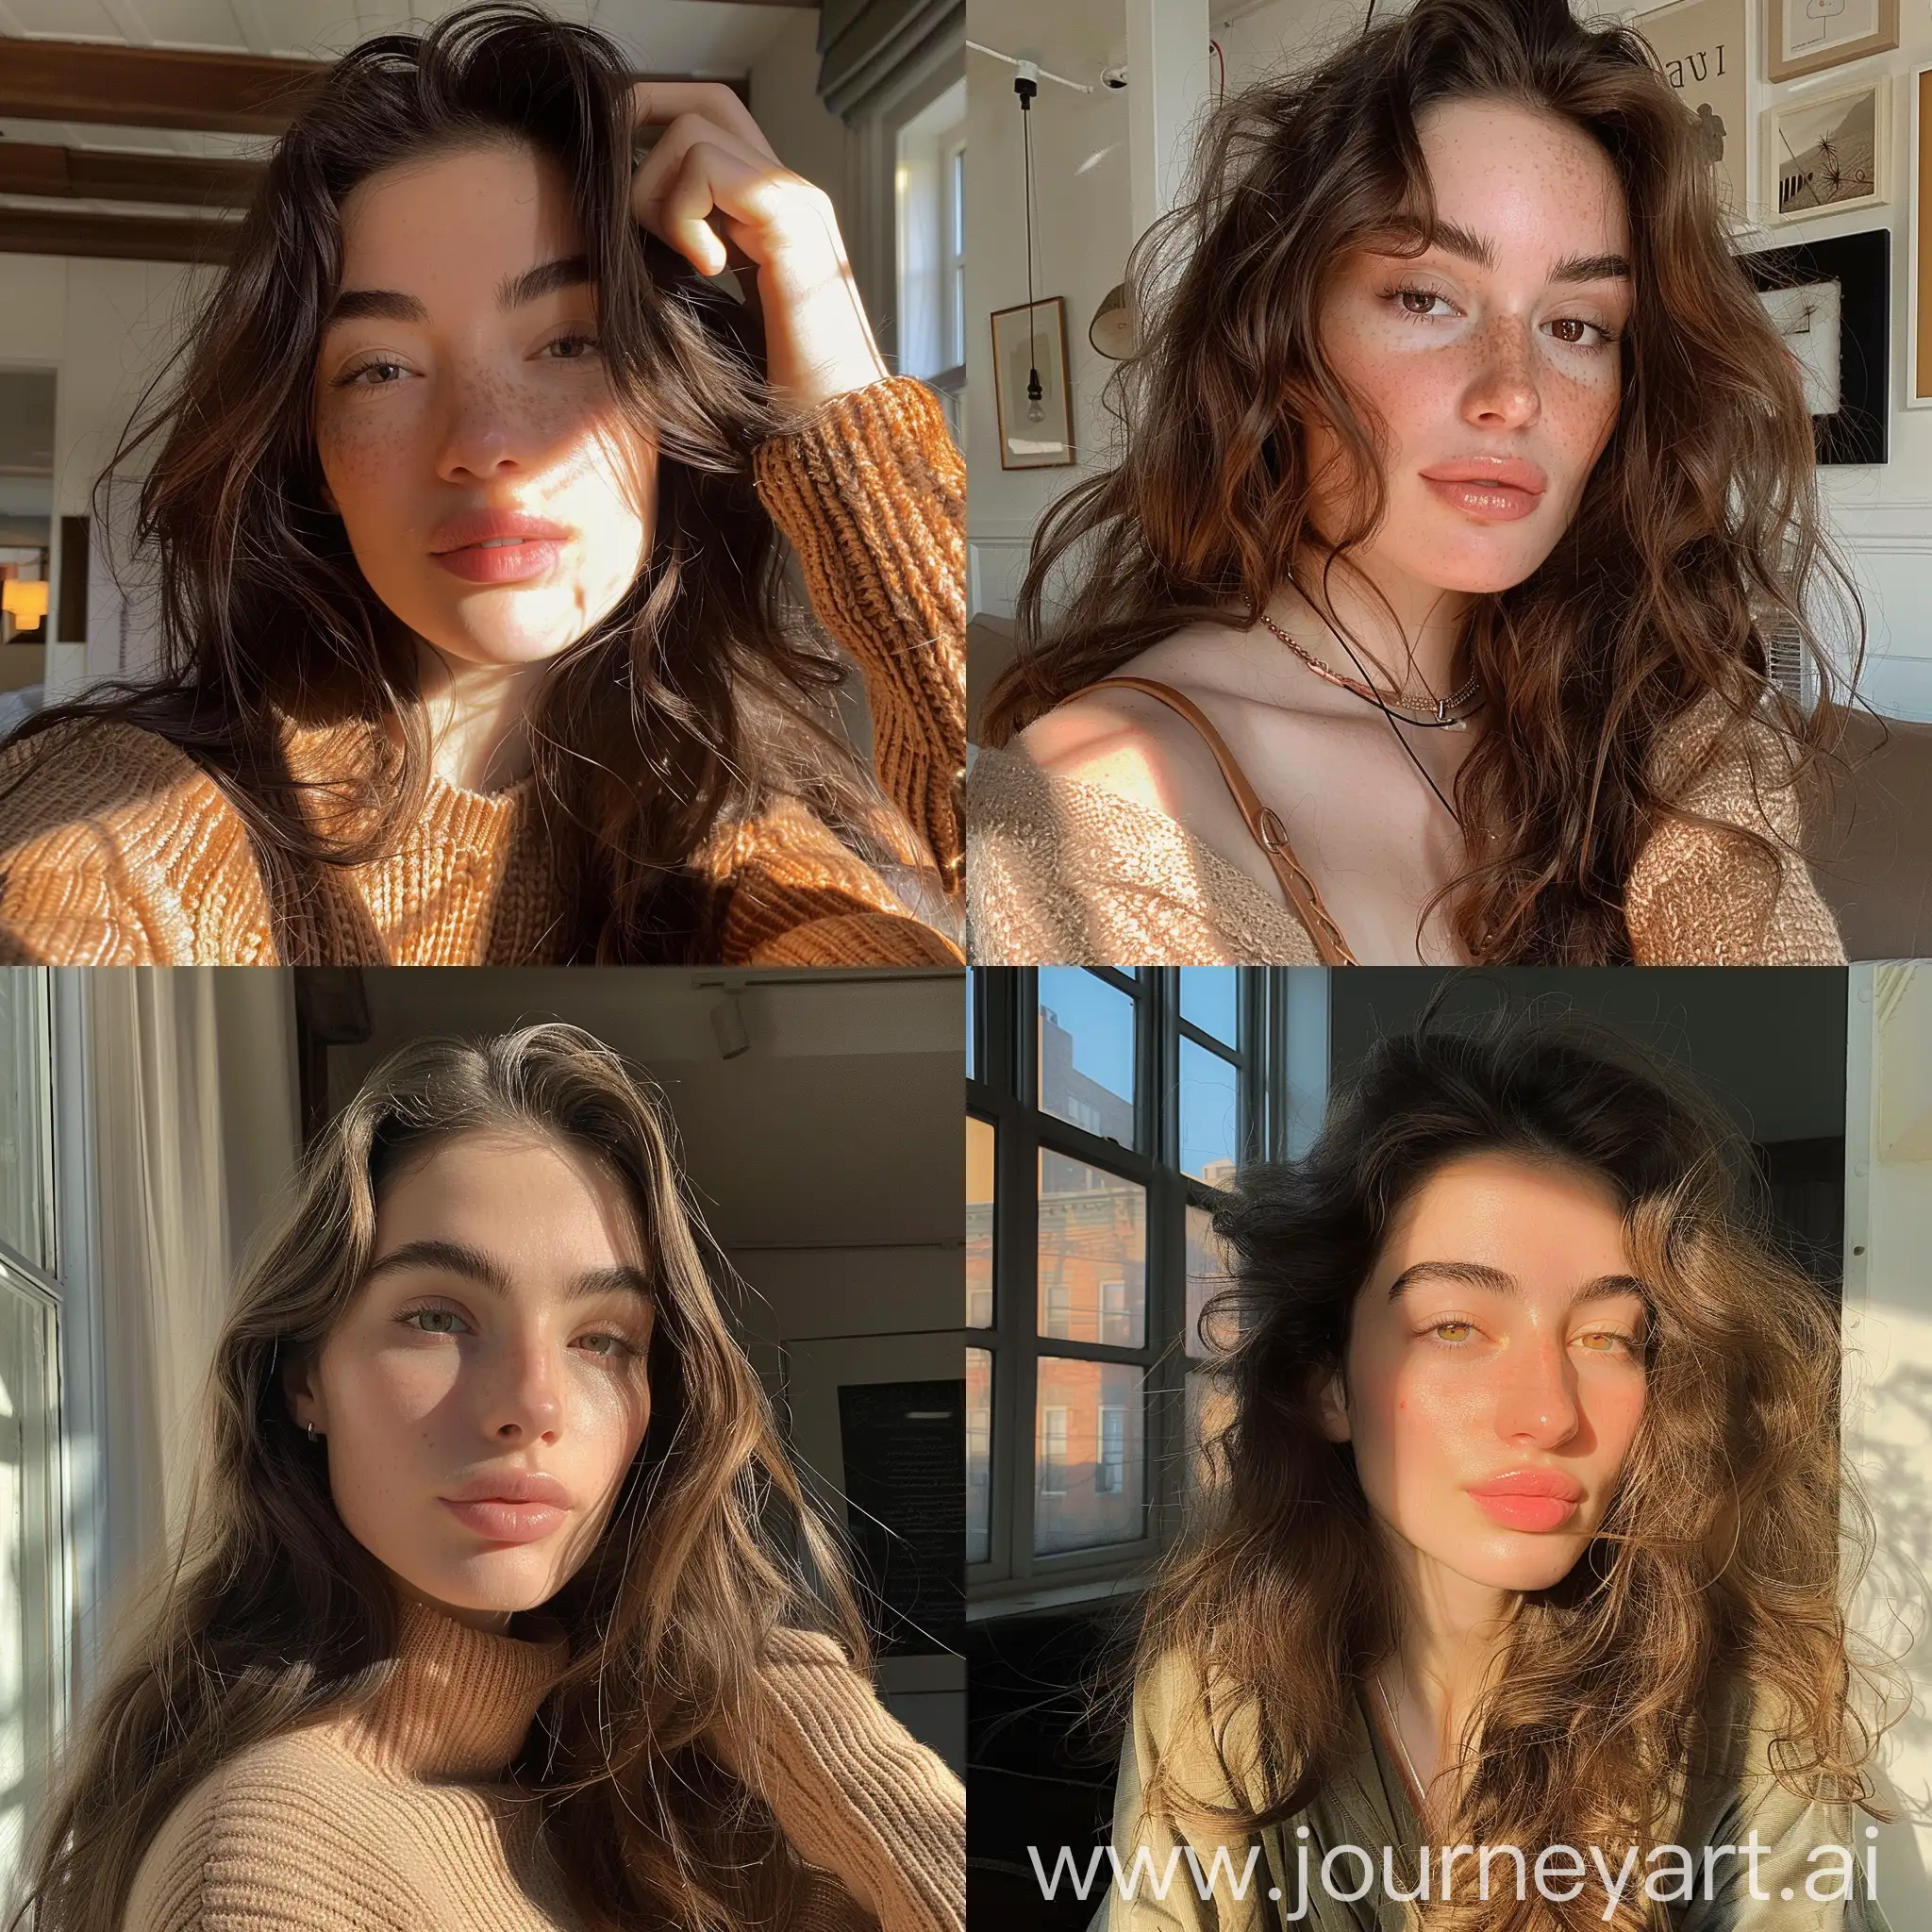 Aesthetic Instagram selfie of a 23 year old girl influencer, super model, bushy eyebrows, full hair, in NYC apartment, warm brown tones, casual clothing, smirk, gorgeous, profile shot, wide set, portrait profile selfie